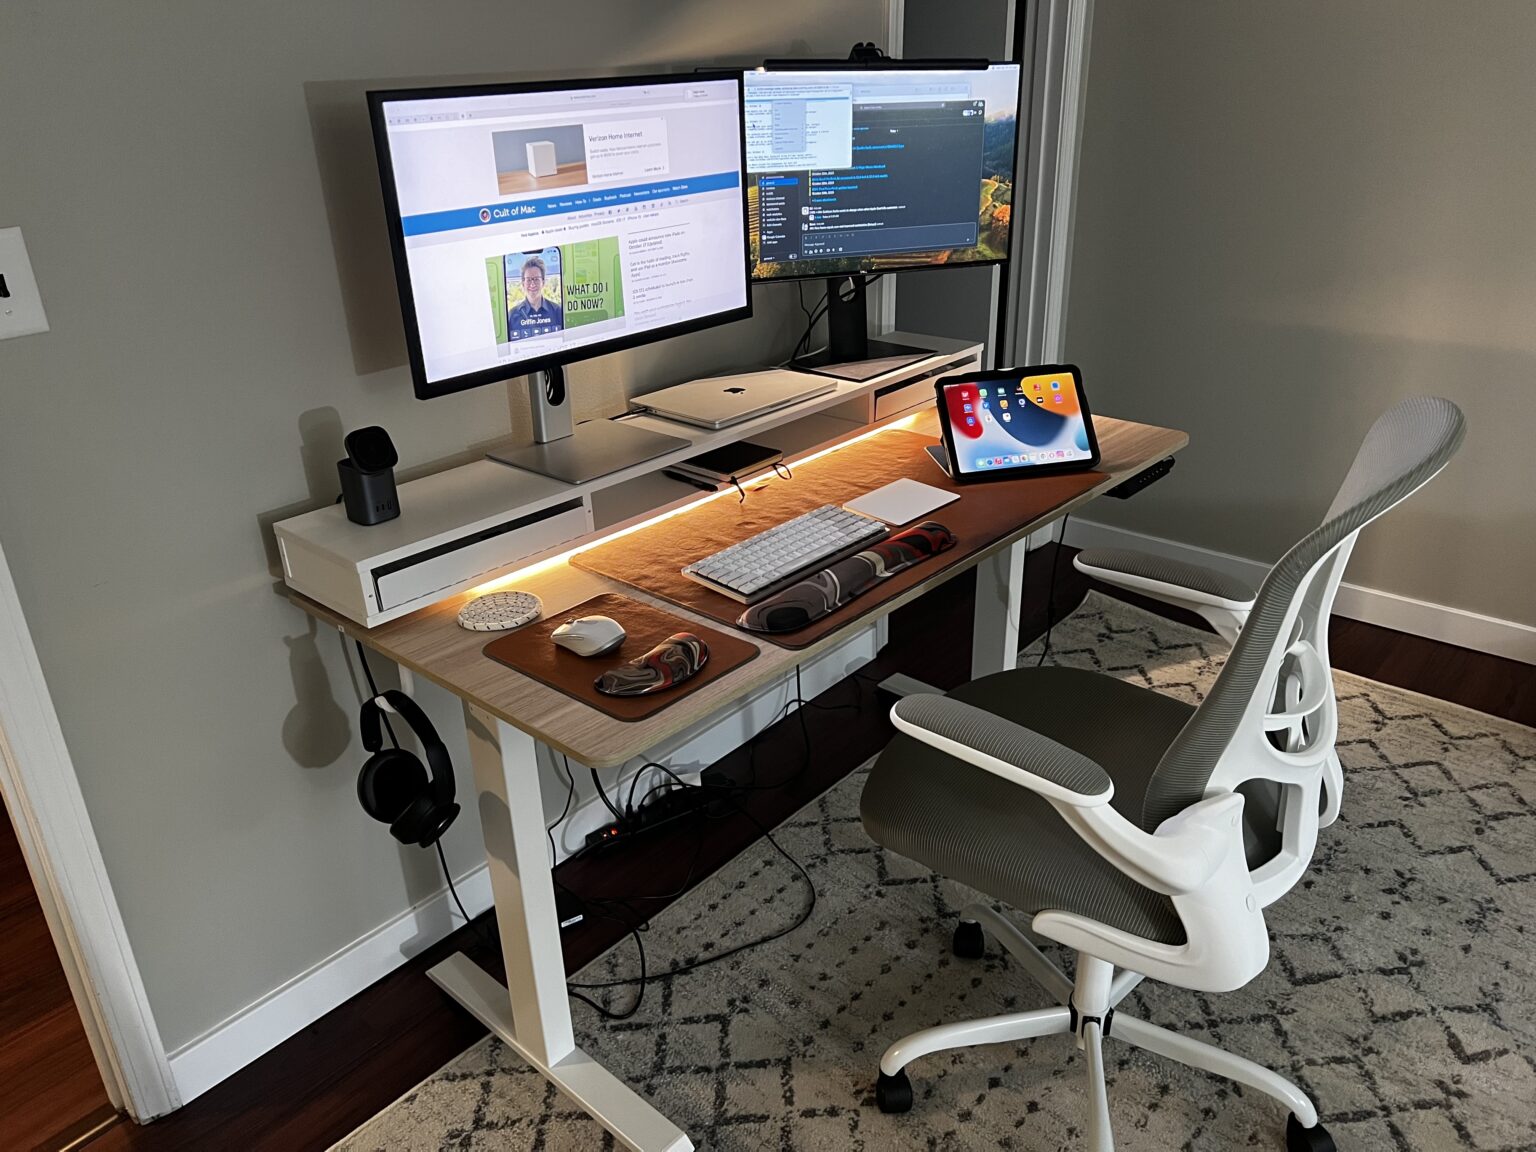 Just a few years ago I worked on a laptop on whatever messy desk I found. Now I have dual-monitor M1 MacBook Pro setup with a standing desk and a proper office chair.